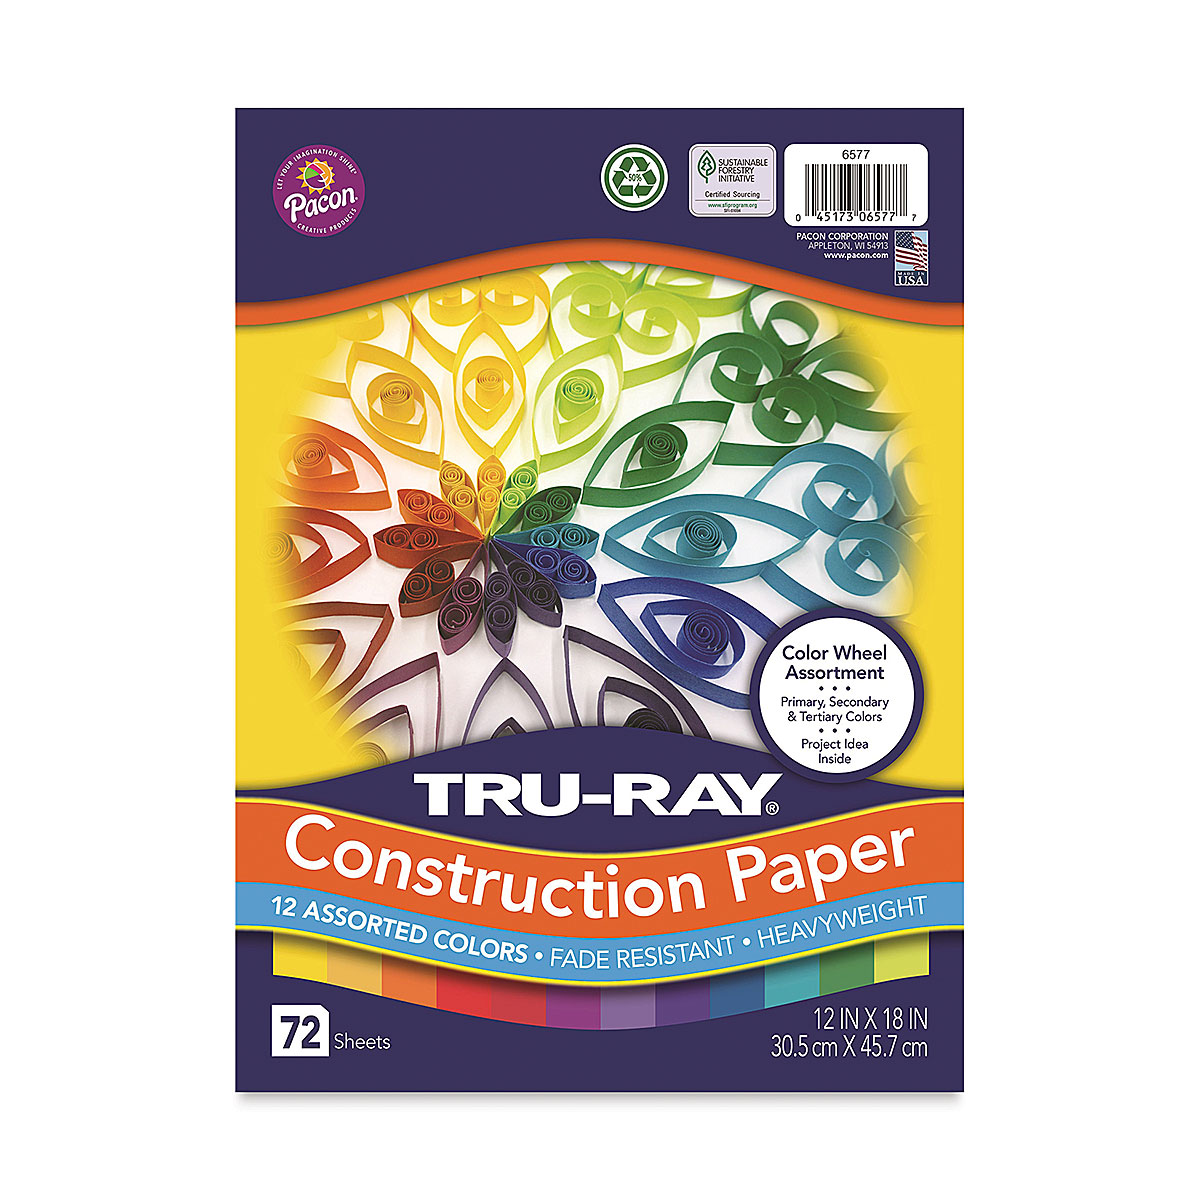 Construction Paper Brown - Pacon Creative Products